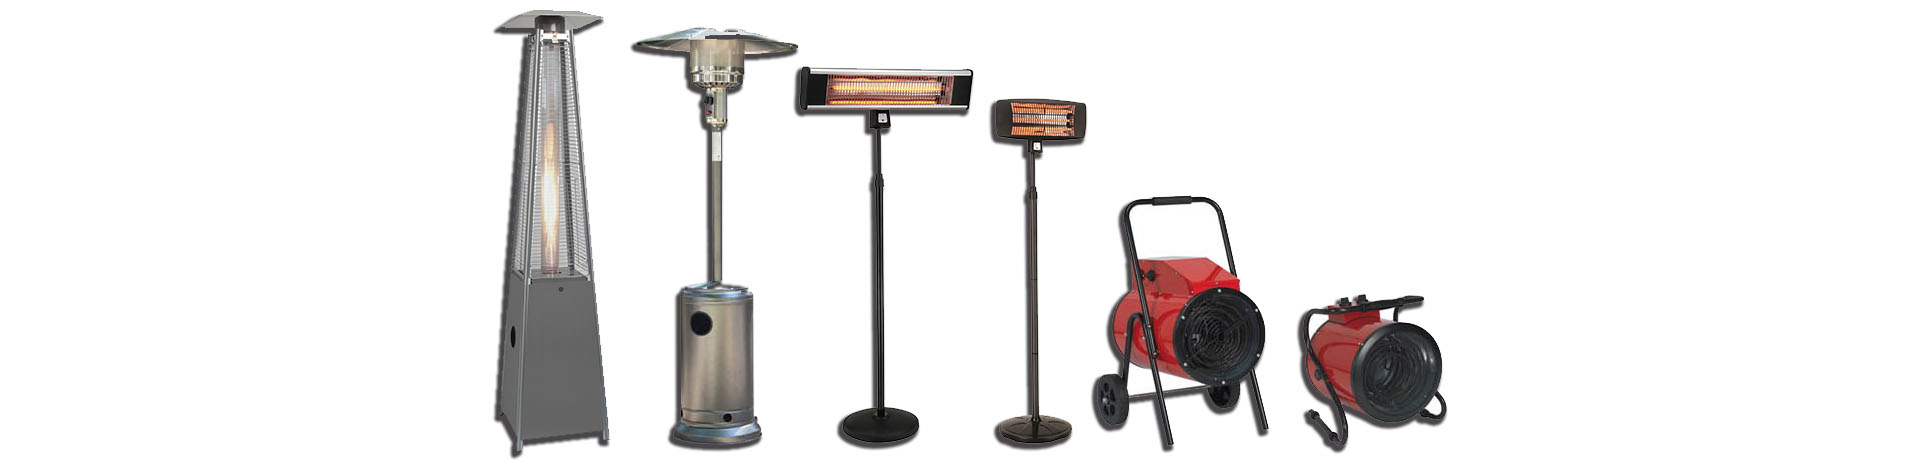 LOOKING FOR AN URGENT OUTDOOR HEATER HIRE? WE BEAT ANY QUOTE CALL NOW!